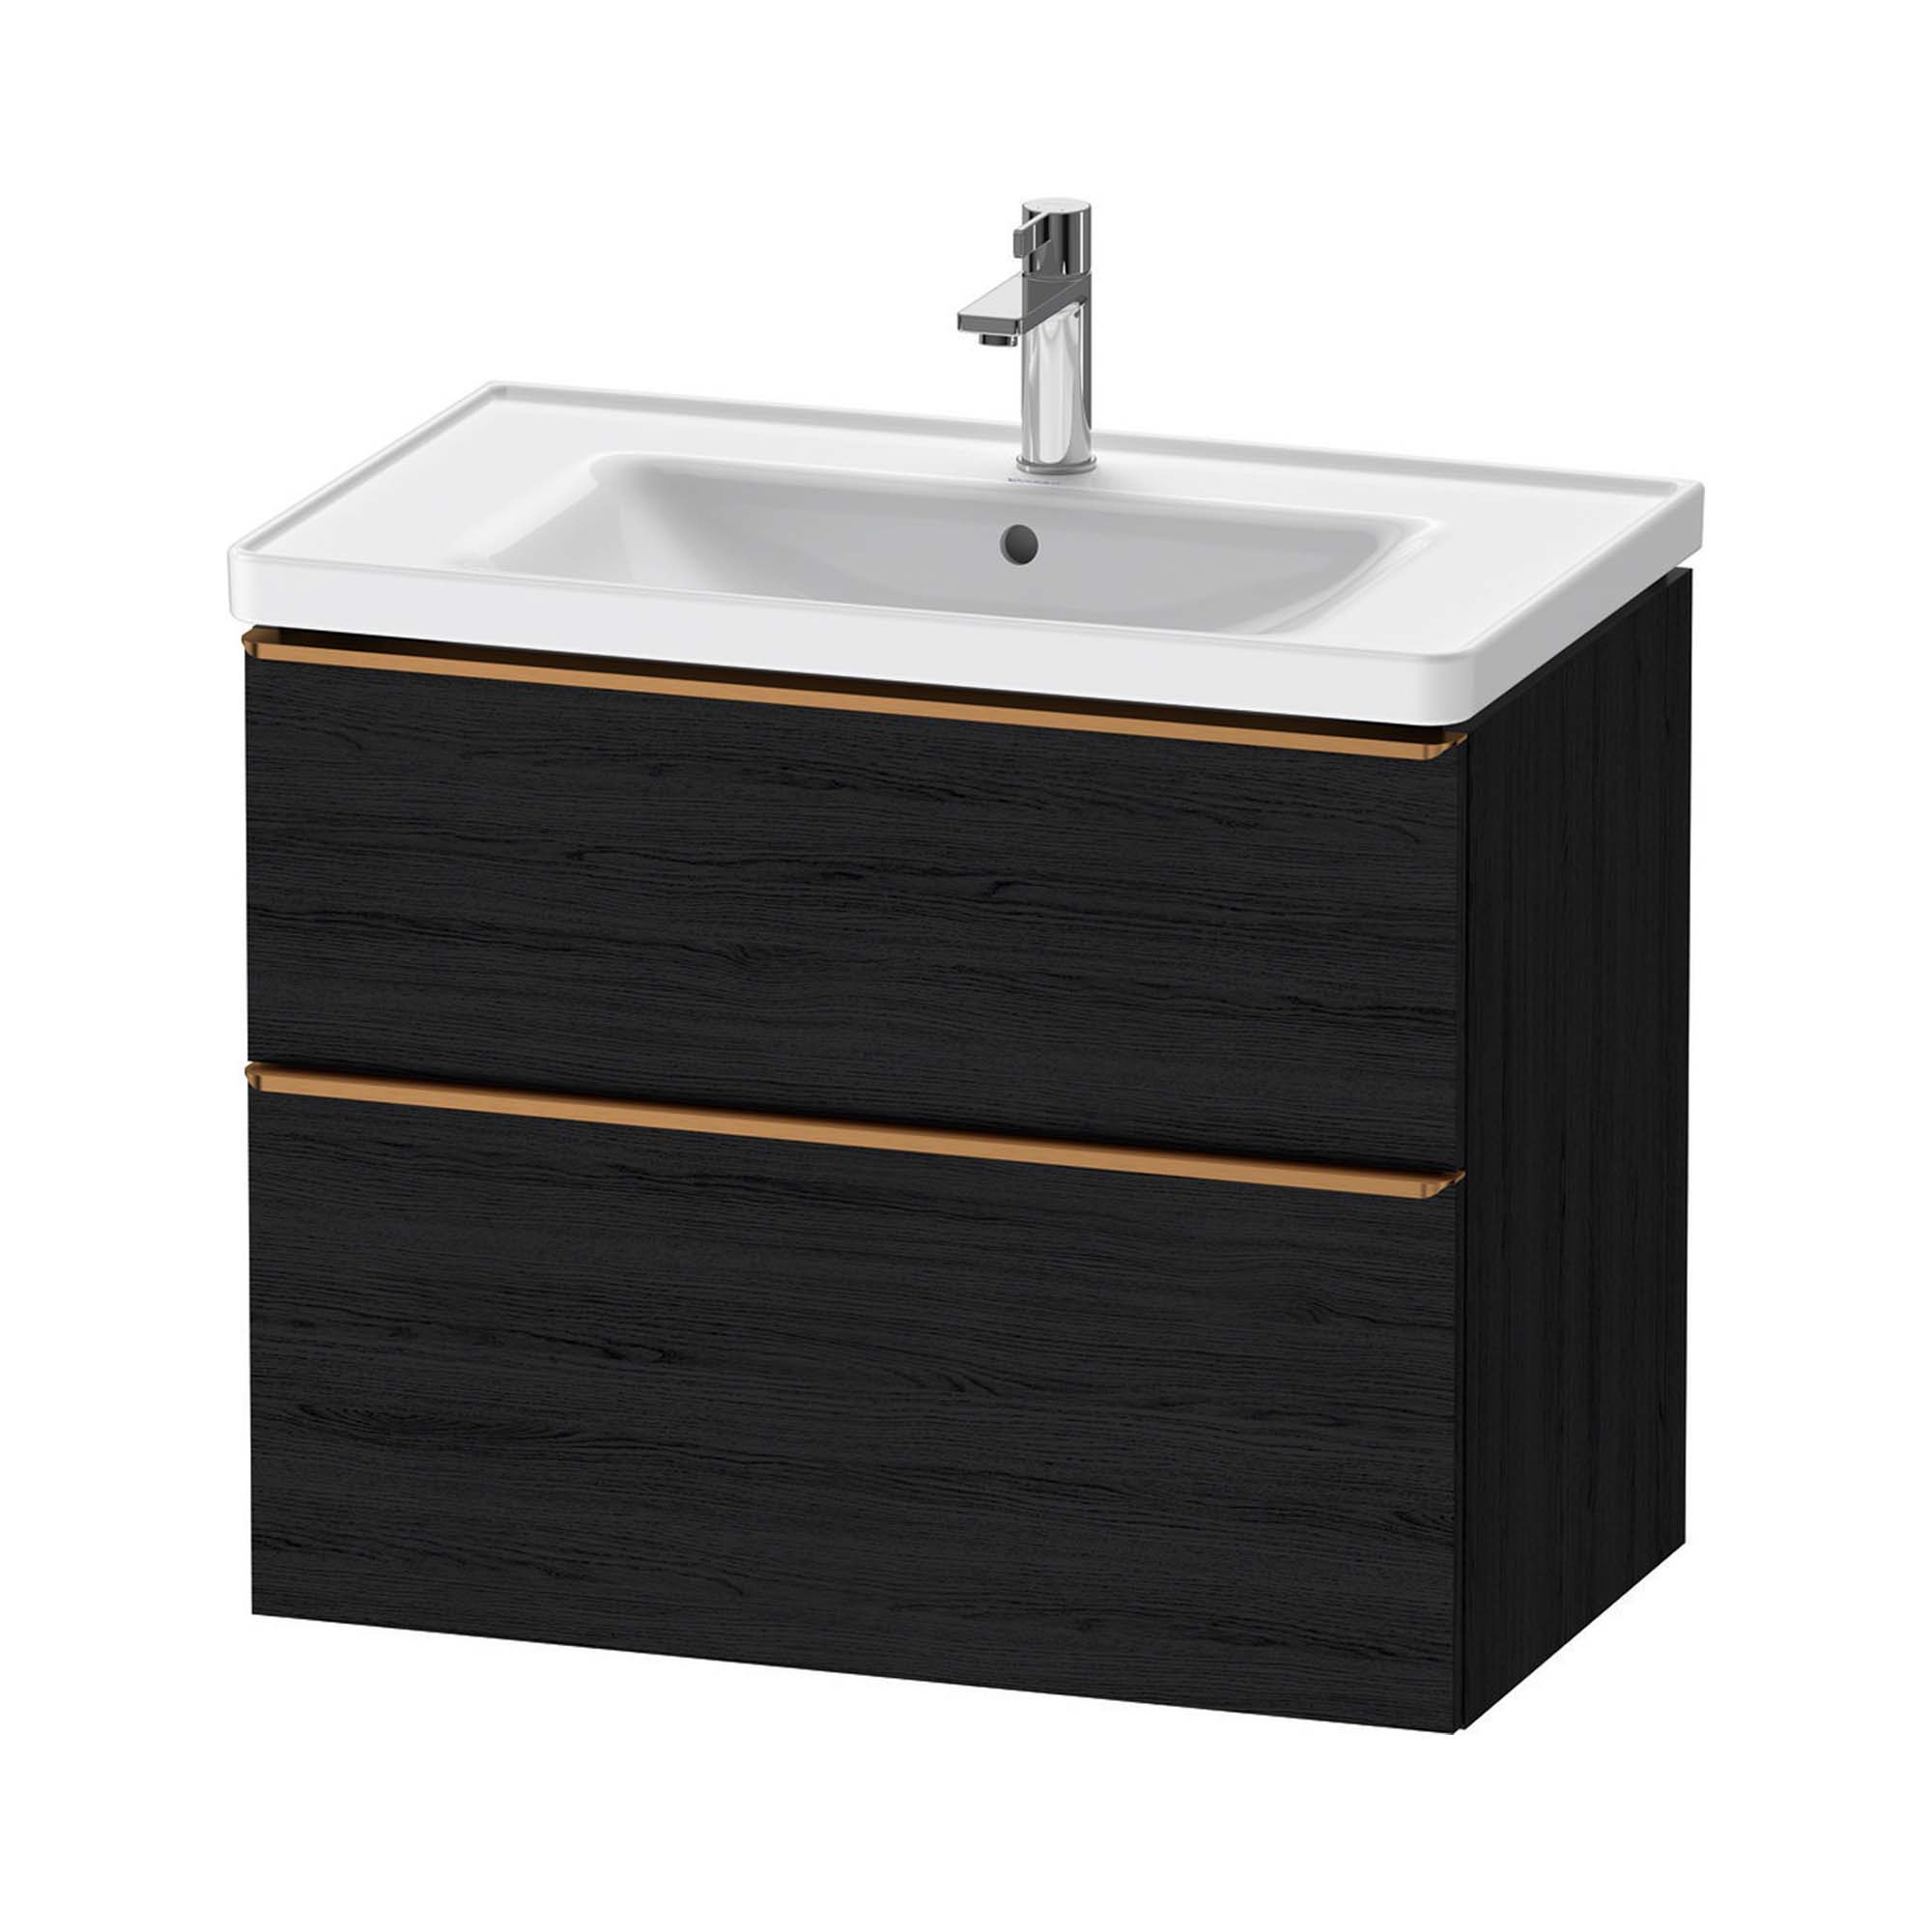 duravit d-neo 800mm wall mounted vanity unit with d-neo basin black oak brushed bronze handles